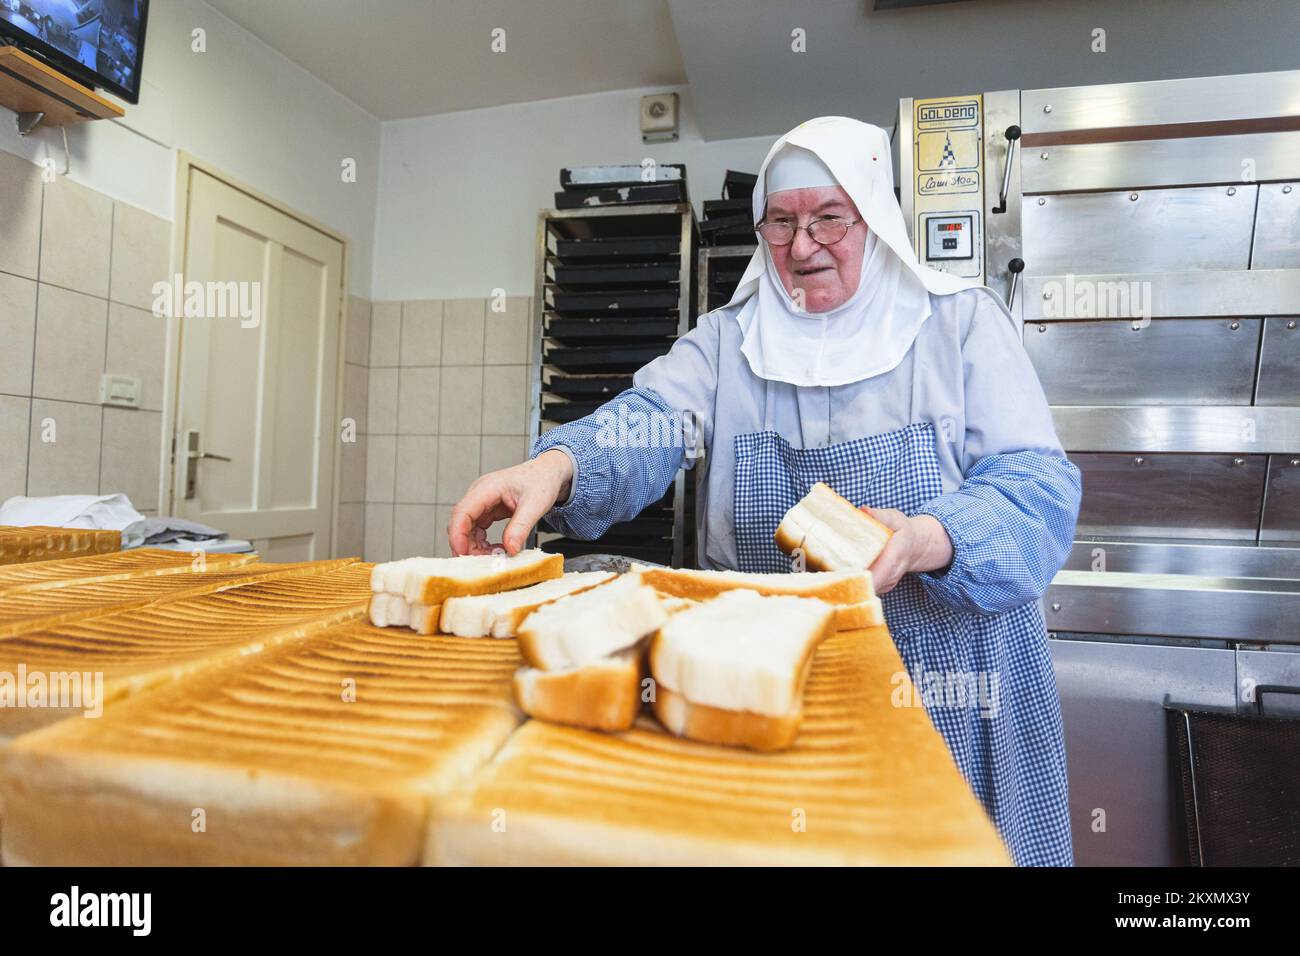 Nuns of Saint Margaretha monastery in Pag, Croatia baking bagels and nunsâ€™ pastry that aims to preserve and develop specific historically rooted creative culinary skills originating from the Benedictine community on 18. MArch 2021. Photo: Marko Dimic/PIXSELL Stock Photo